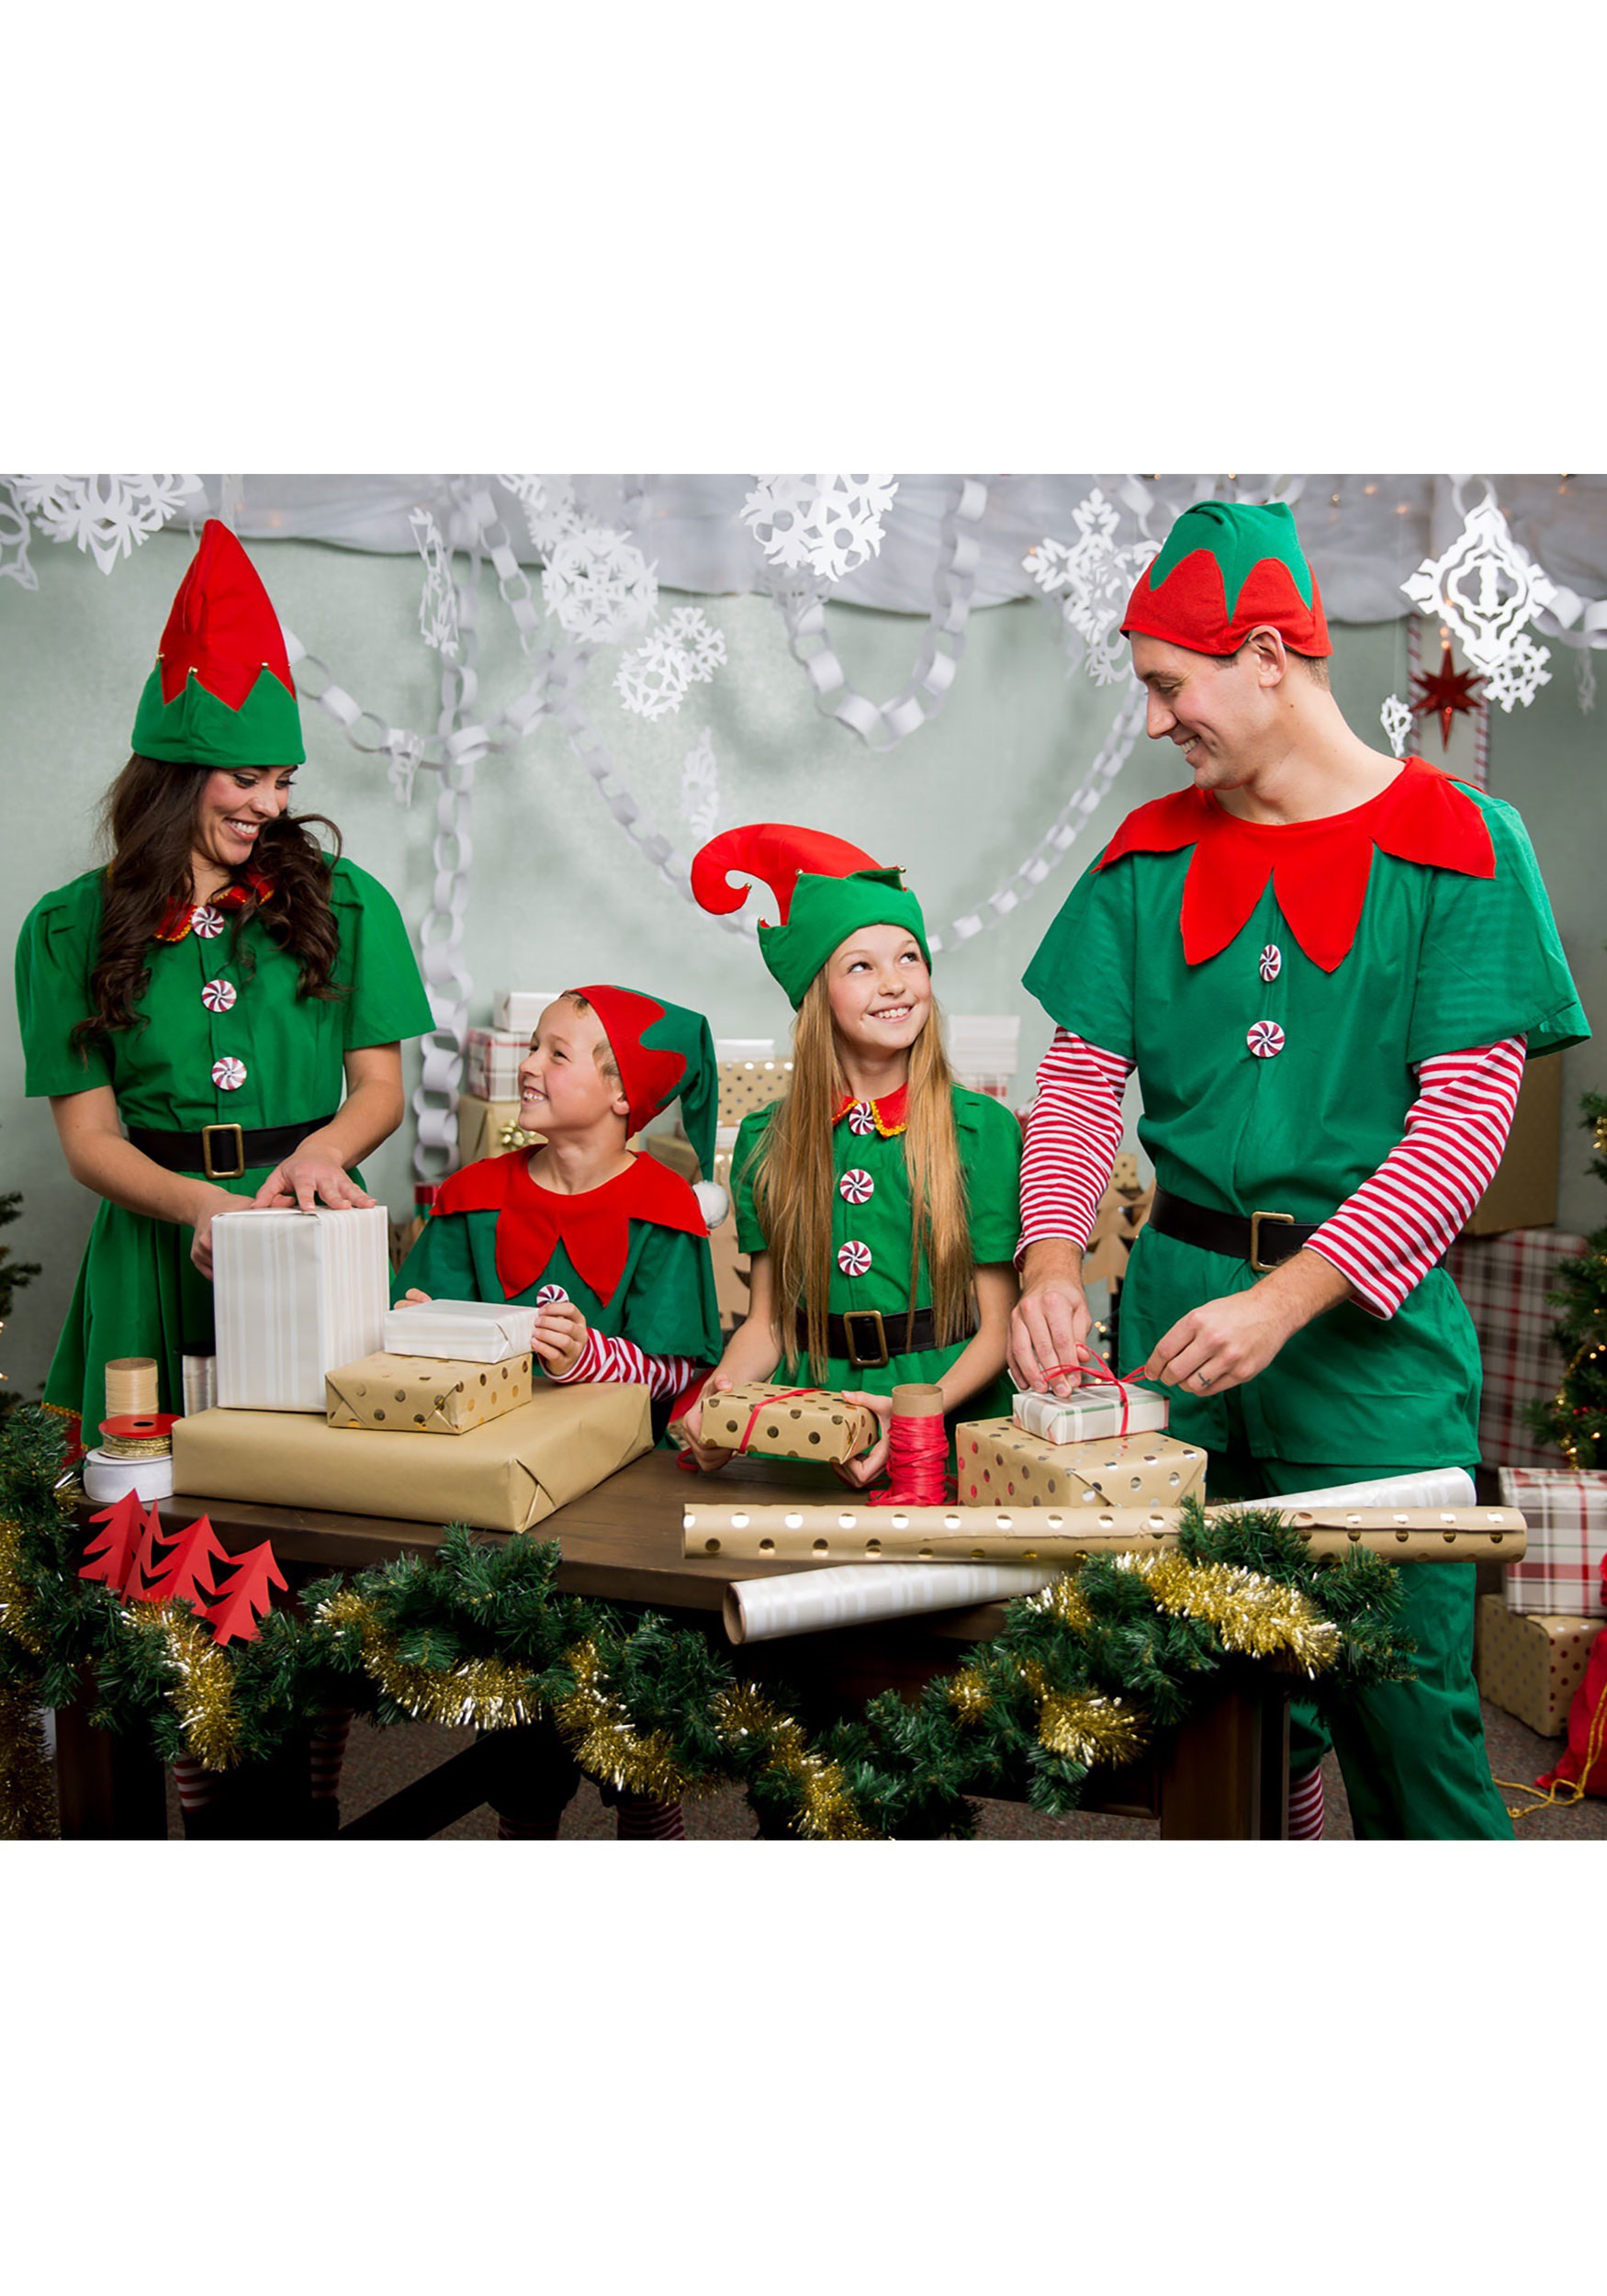 Holiday Elf Costume For Adults